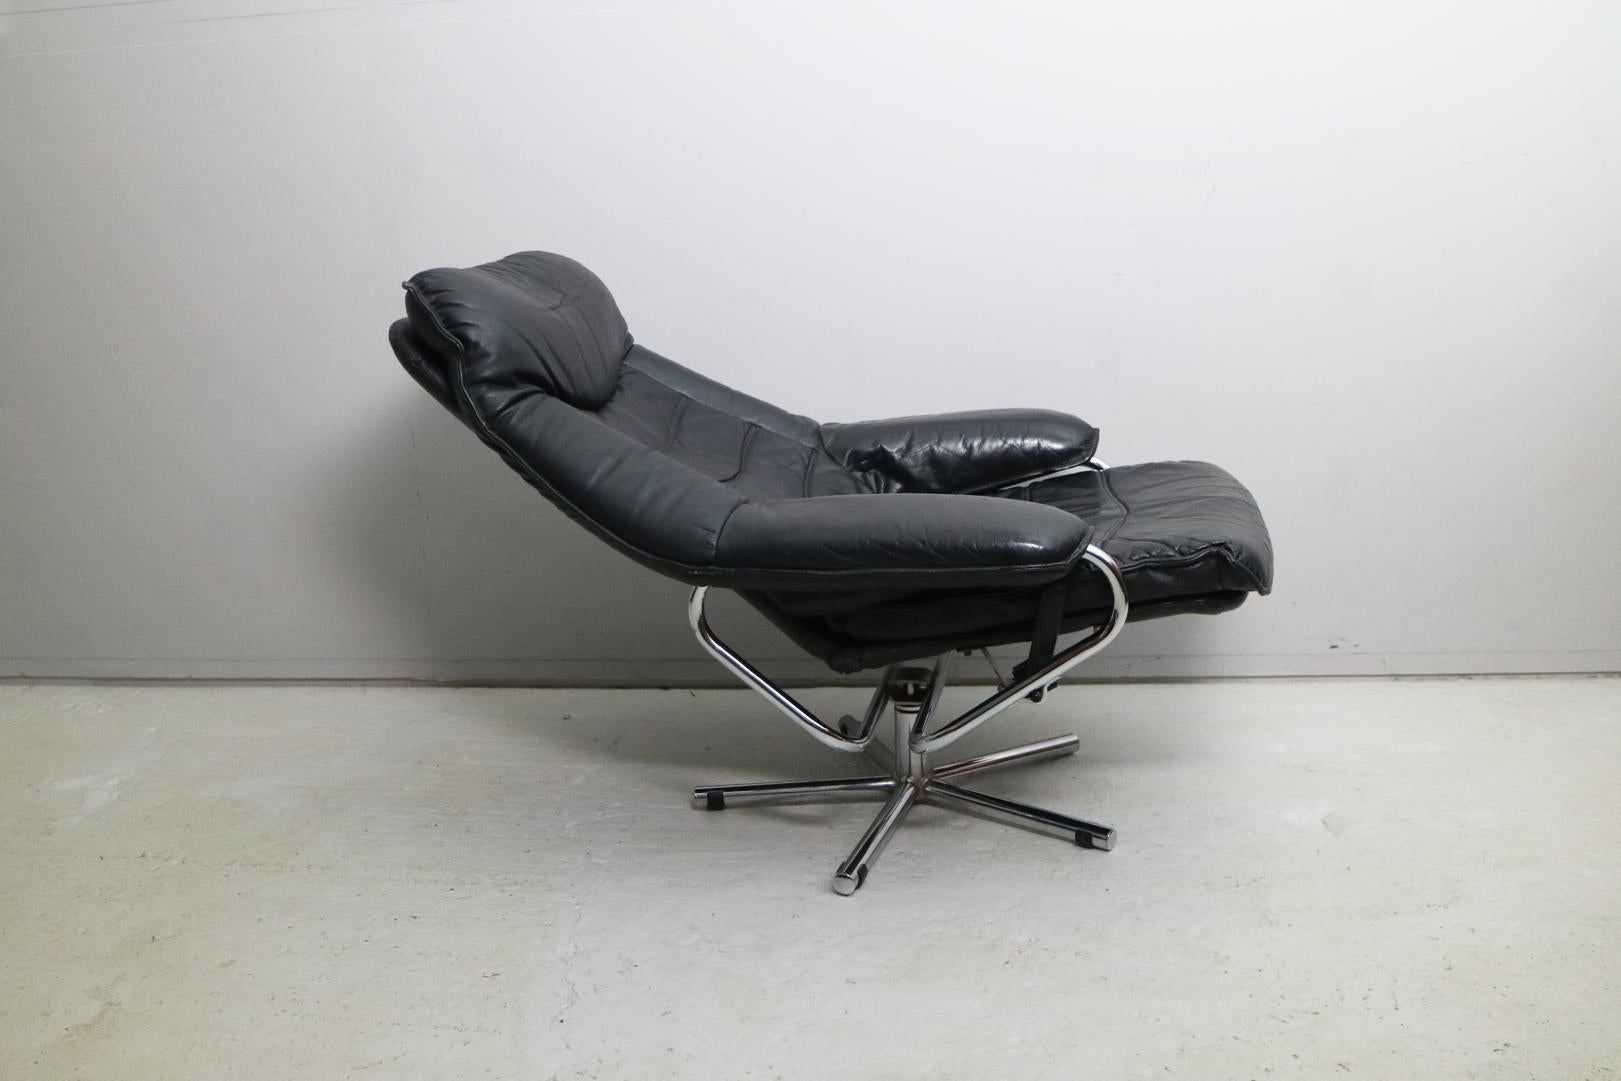 A black leather tubular framed lounge chair, made in Spjelkavik Norway by Skoghaug Industries. Most likely produced from the late 1960s-early 1970s. Features a rotating swivel base and reclining function. Can be locked using a lever to one side of